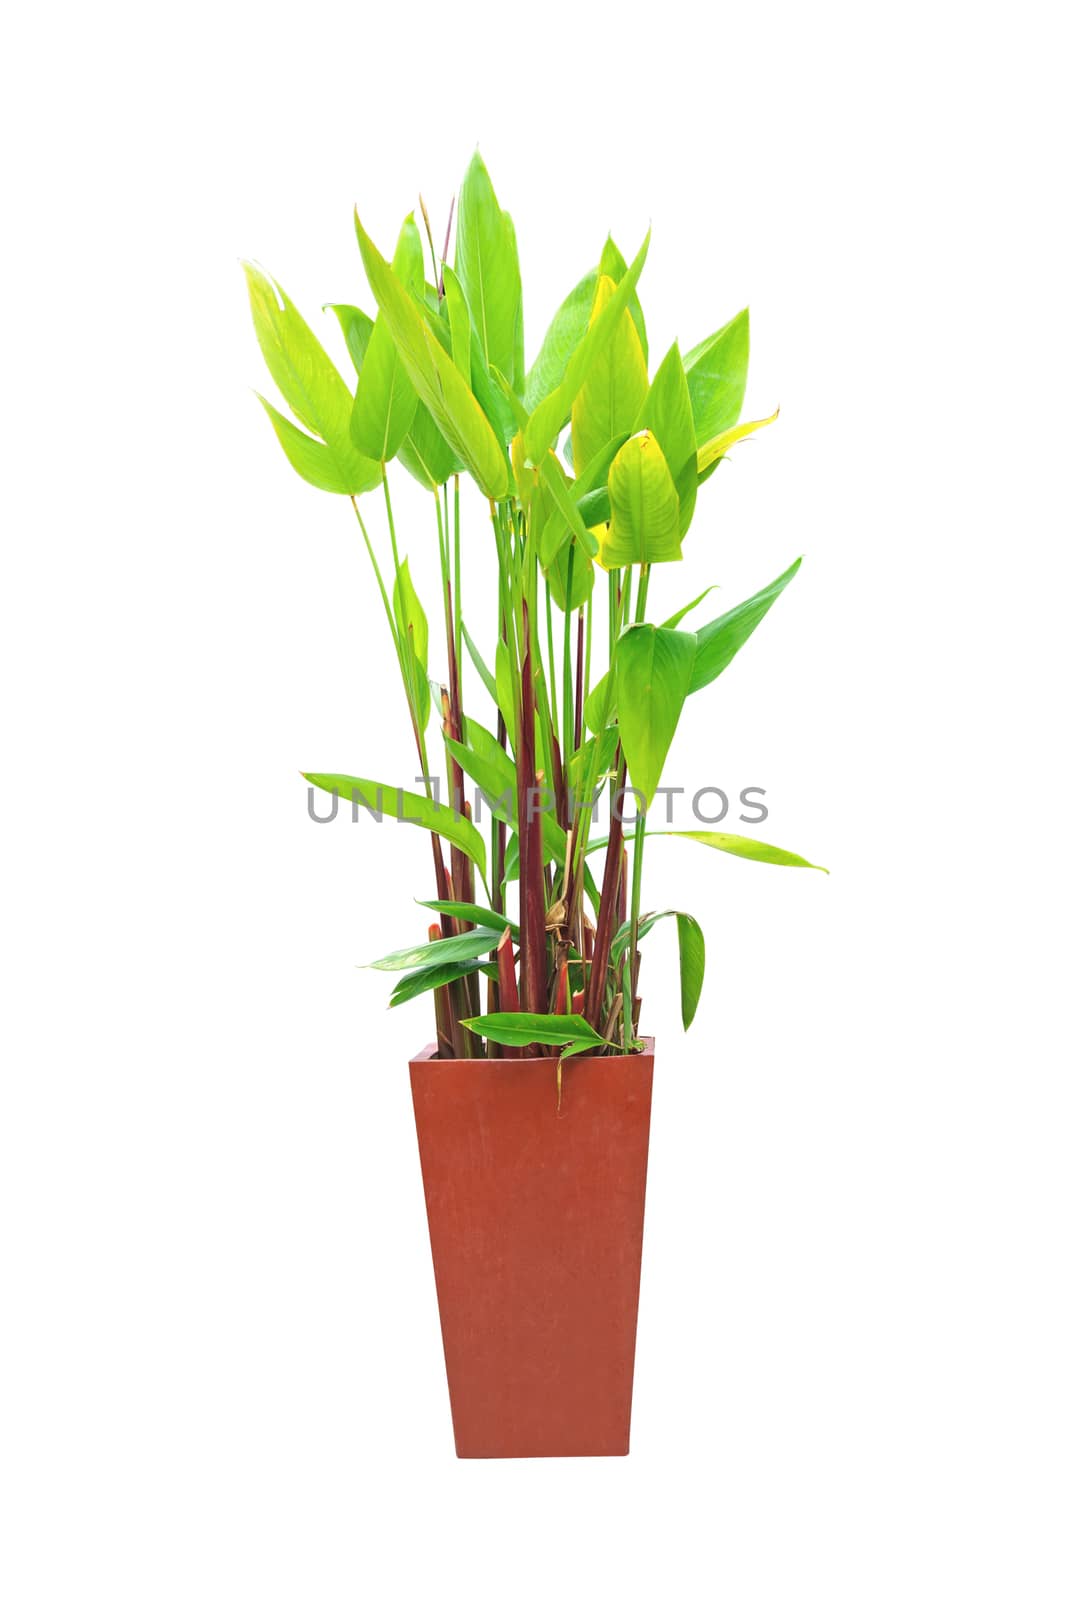 Plants grown in jardiniere isolated on white background